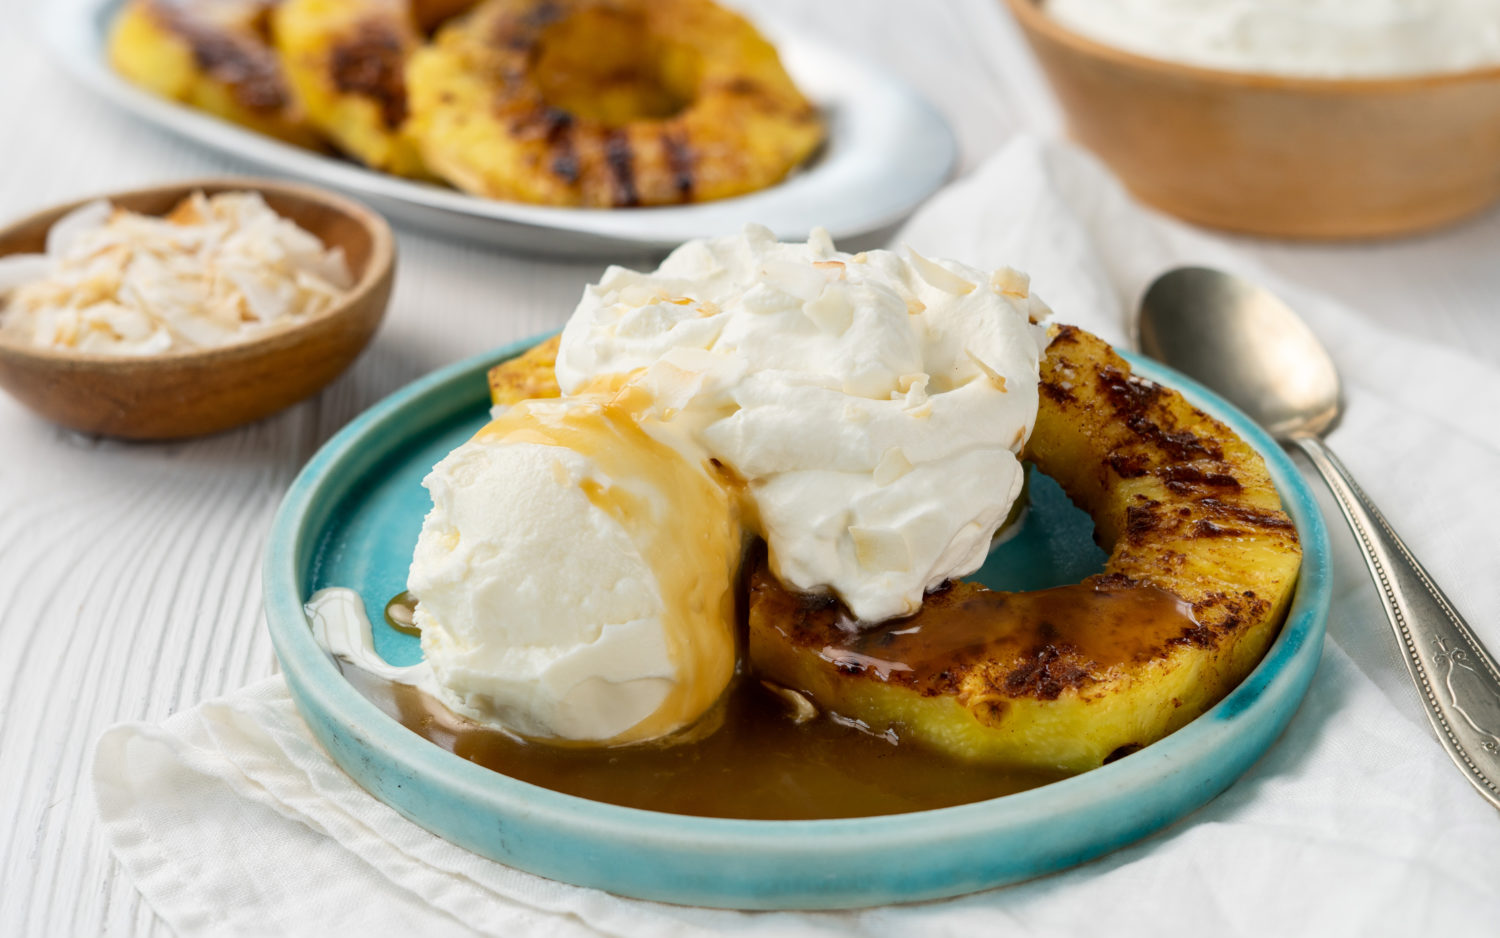 grilled pineapple slice topped with ice cream and whipped cream